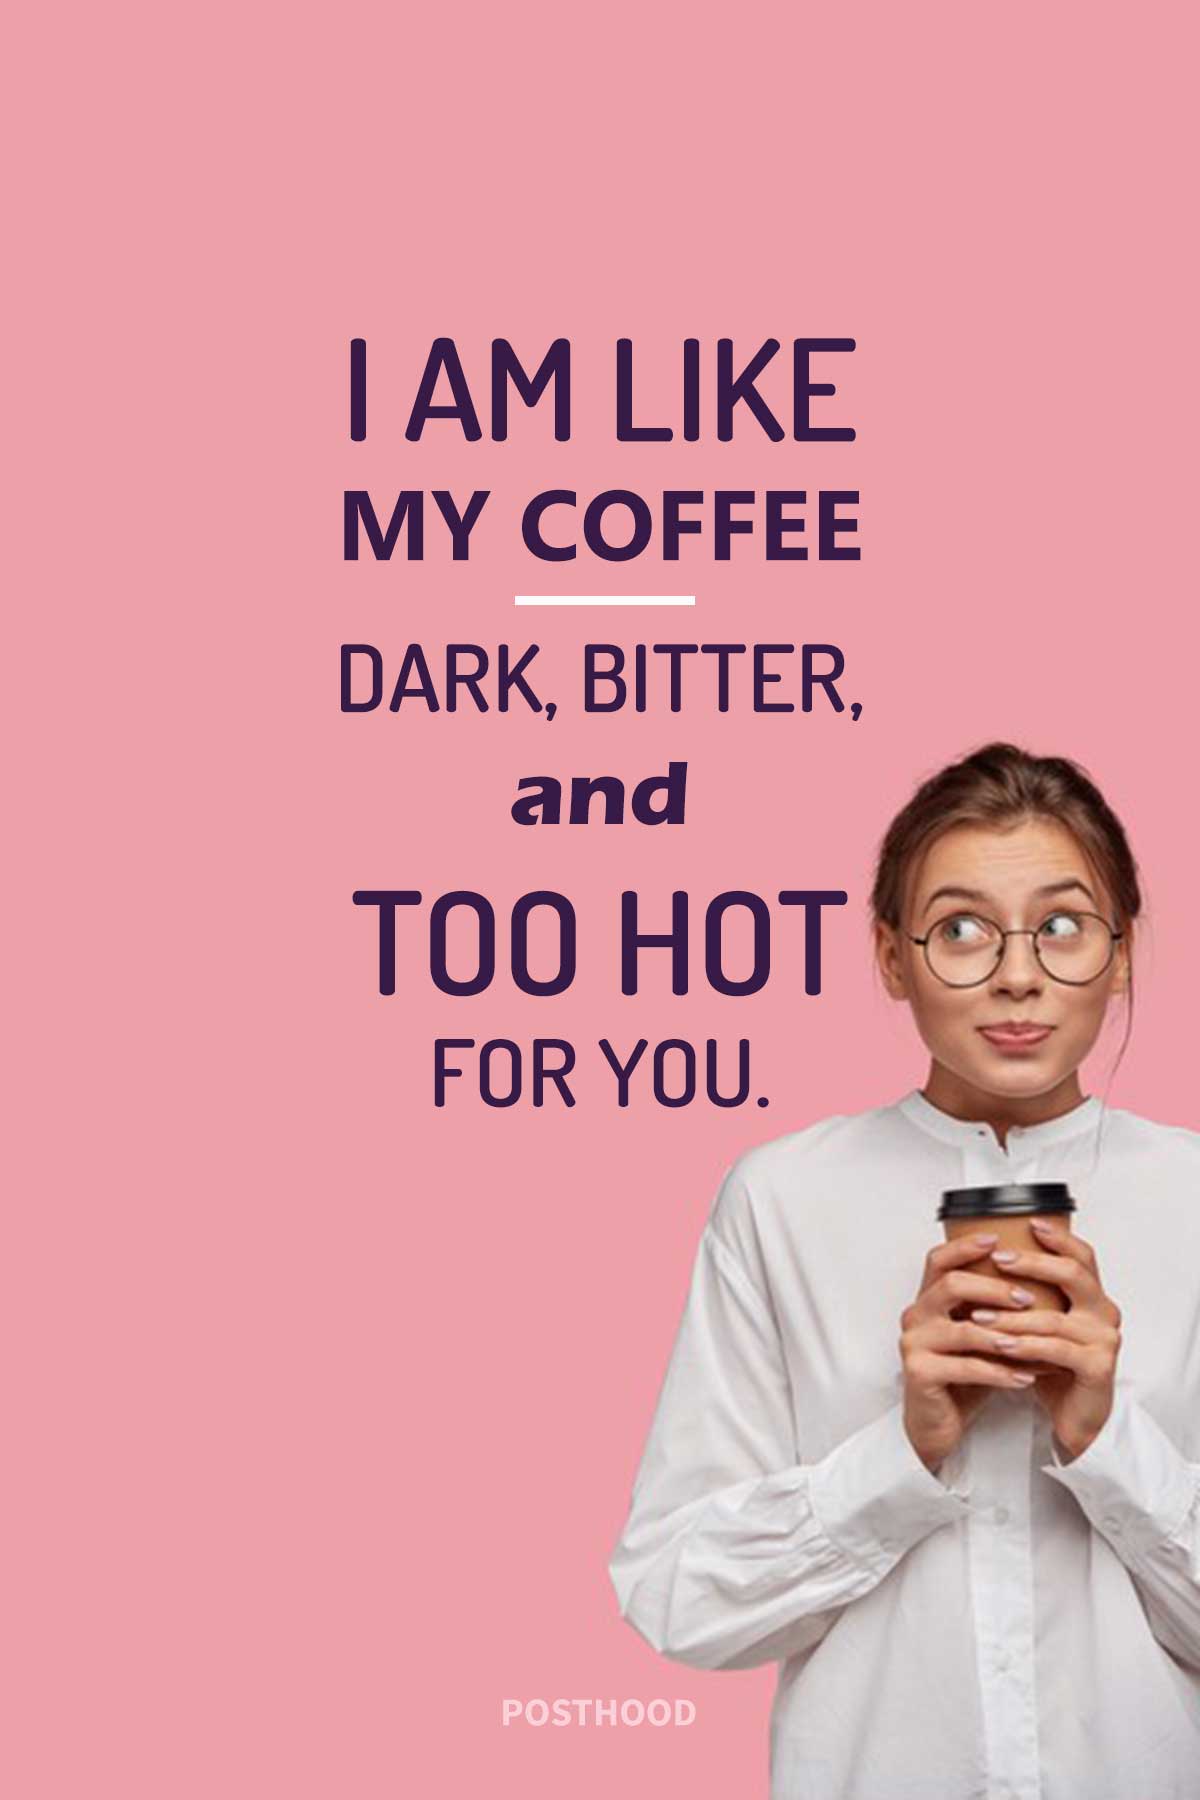 80 humor coffee quotes that will perfectly match your coffee love. Best Coffee love quotes for him.